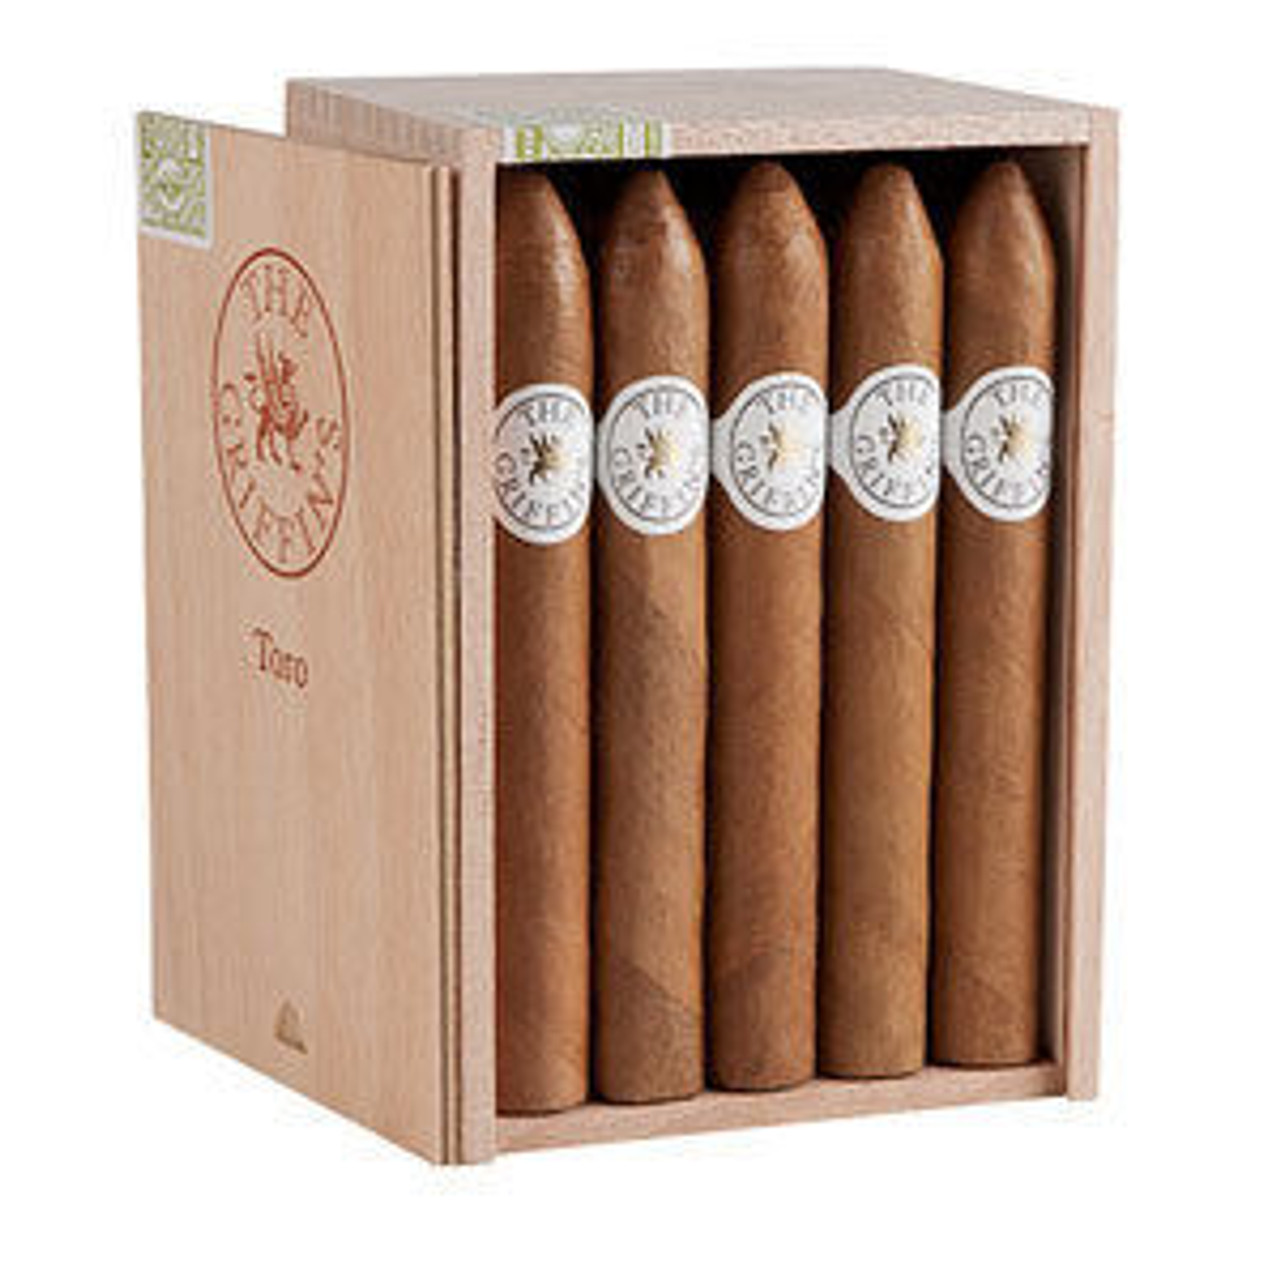 The Griffin's No. 500 Cigars - 5 x 42 (Box of 25)